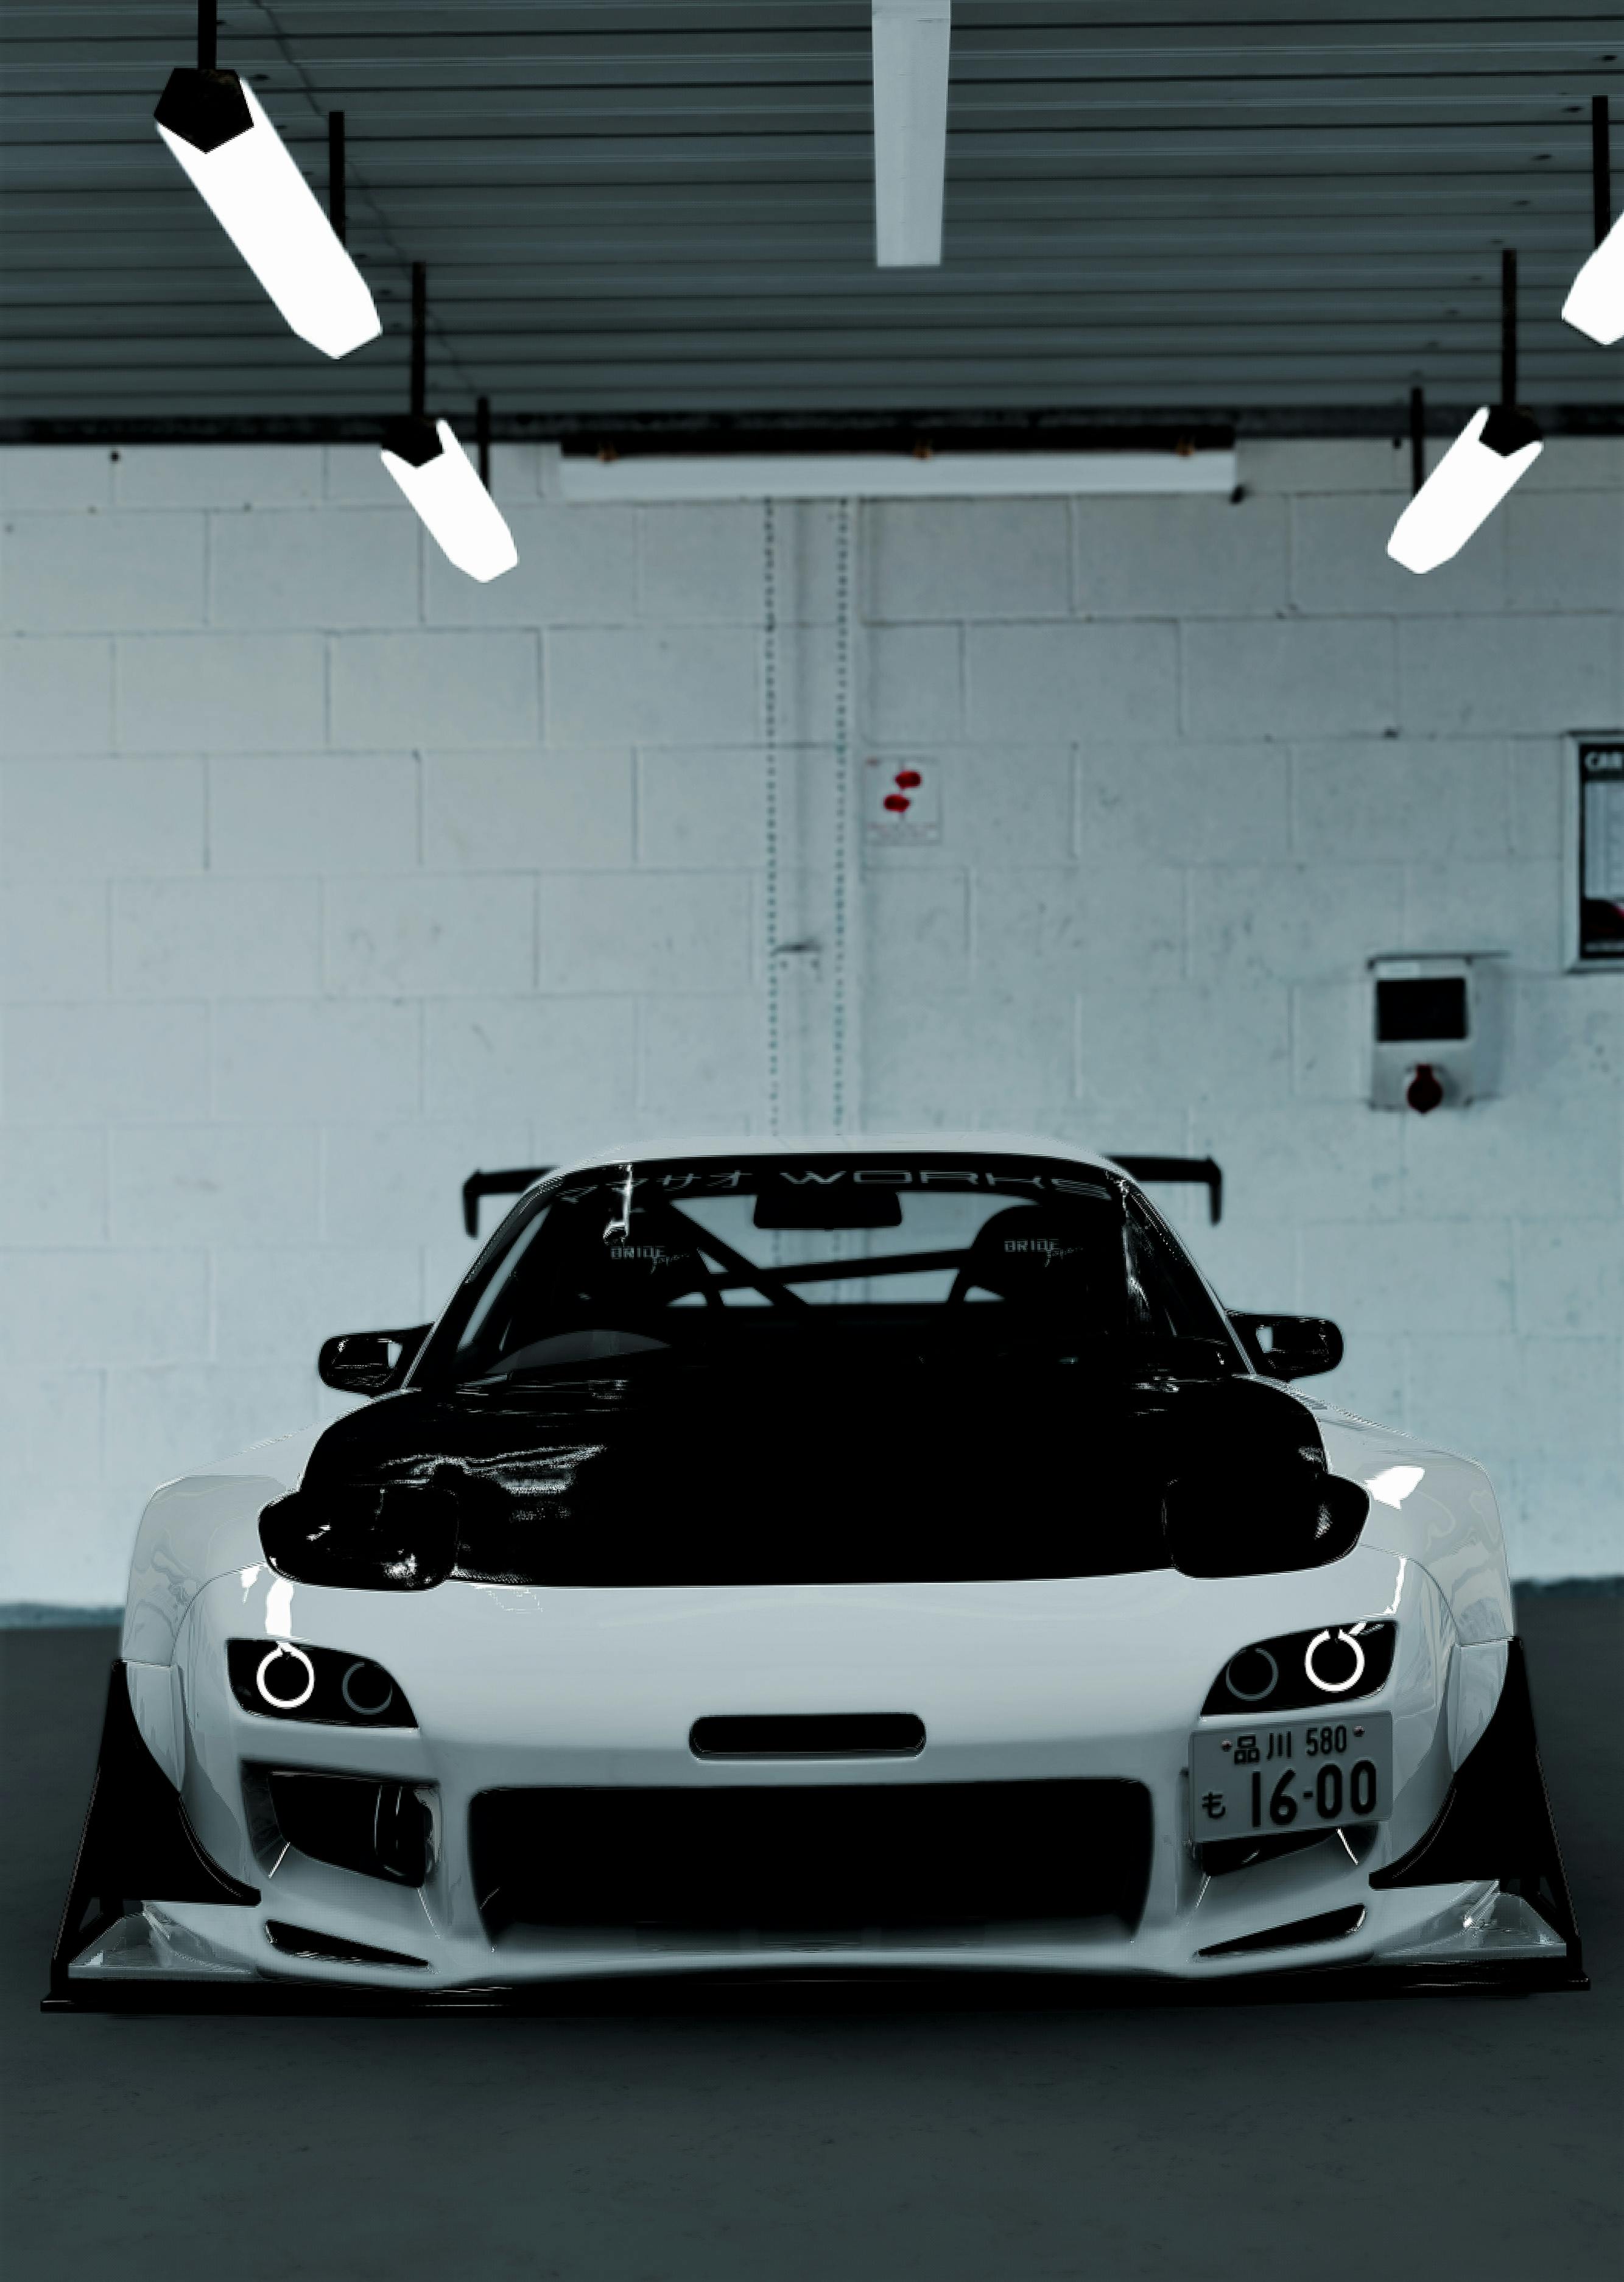 Mazda RX7 Night IPhone Wallpaper  IPhone Wallpapers  iPhone Wallpapers